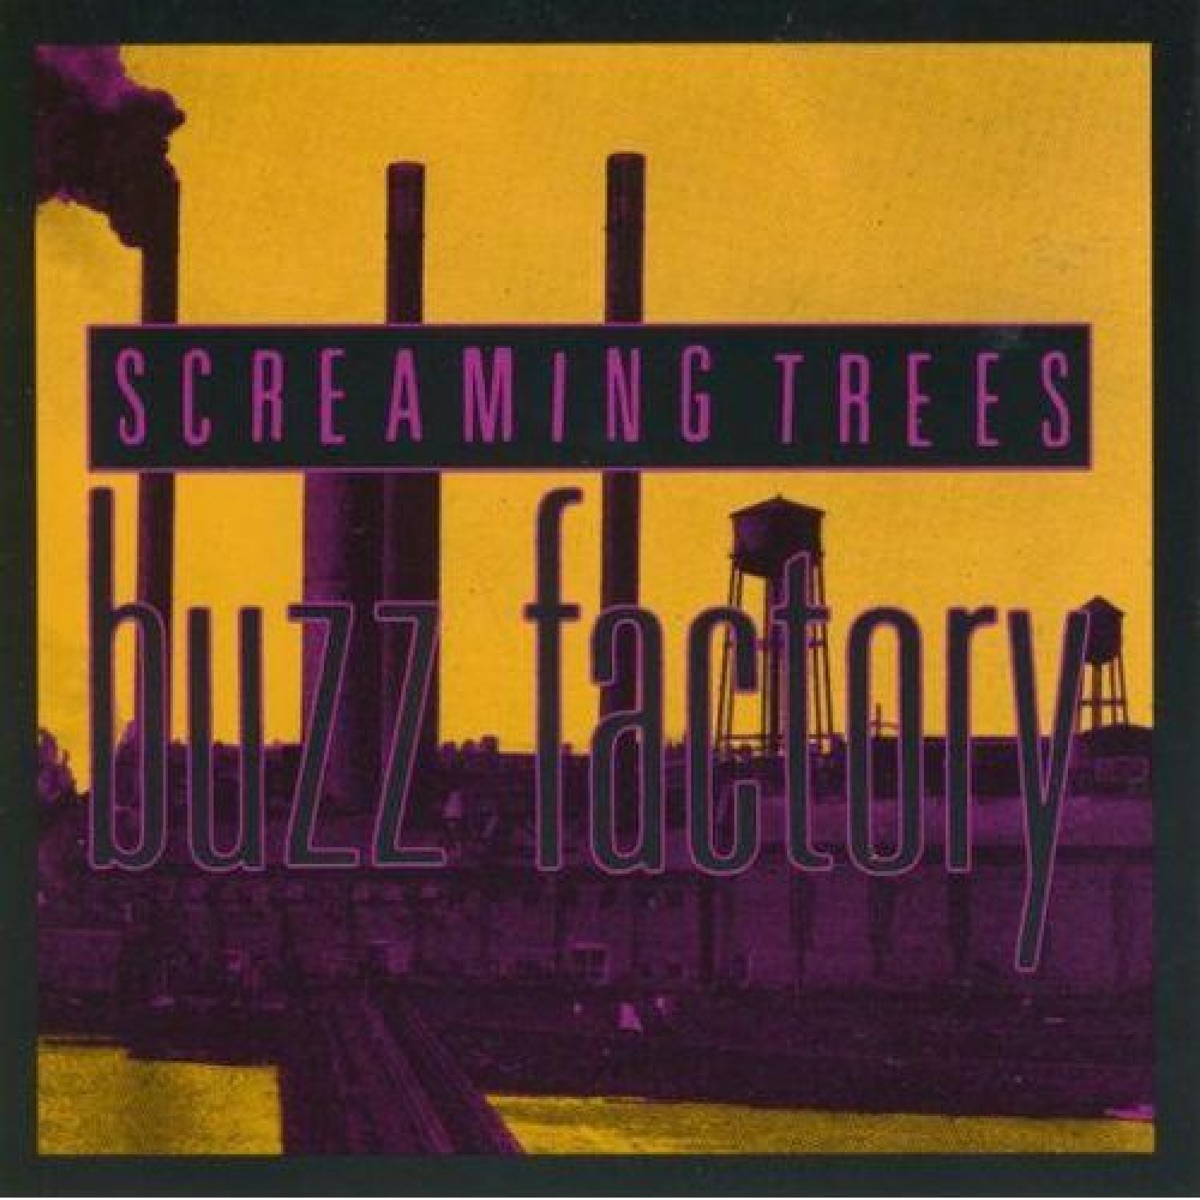 Invisible Lantern by Screaming Trees on Apple Music